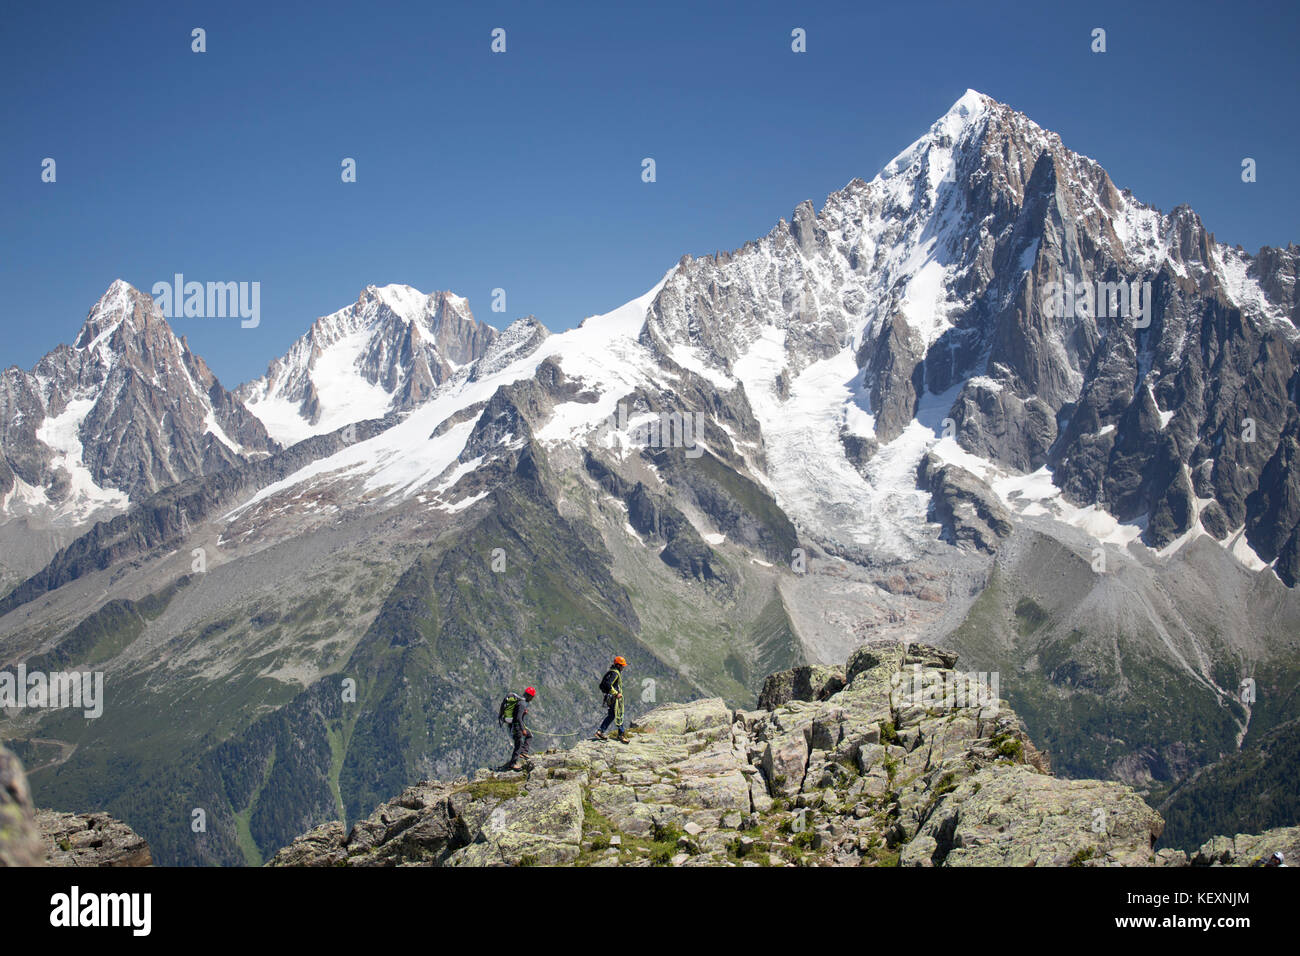 Two mountaineers on a rocky ridge high above Chamonix in the French Alps. Stock Photo